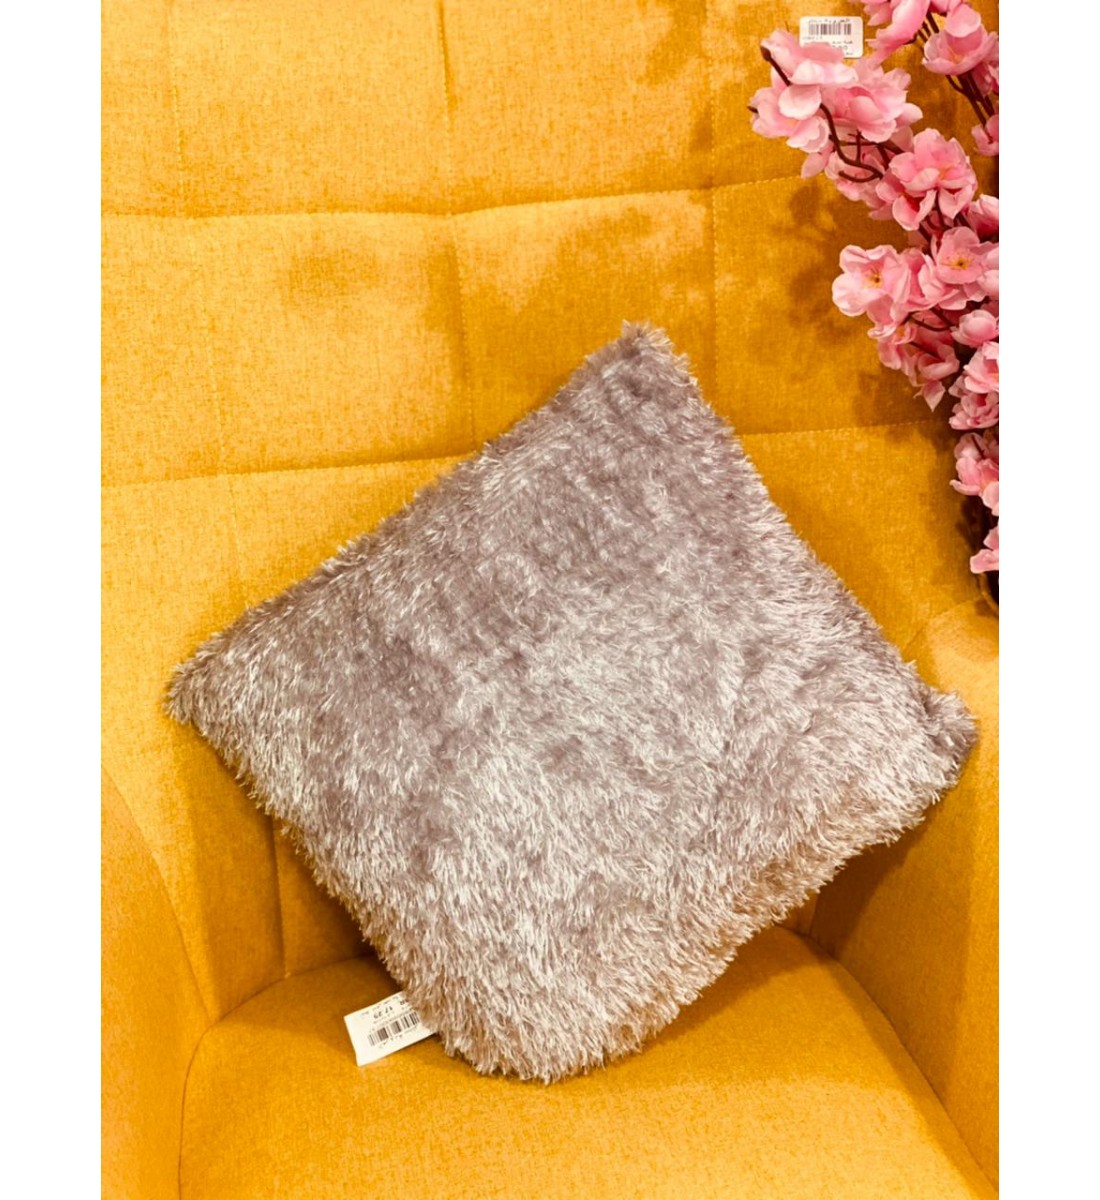 Soft and comfortable square pillow, 40 * 40 cm